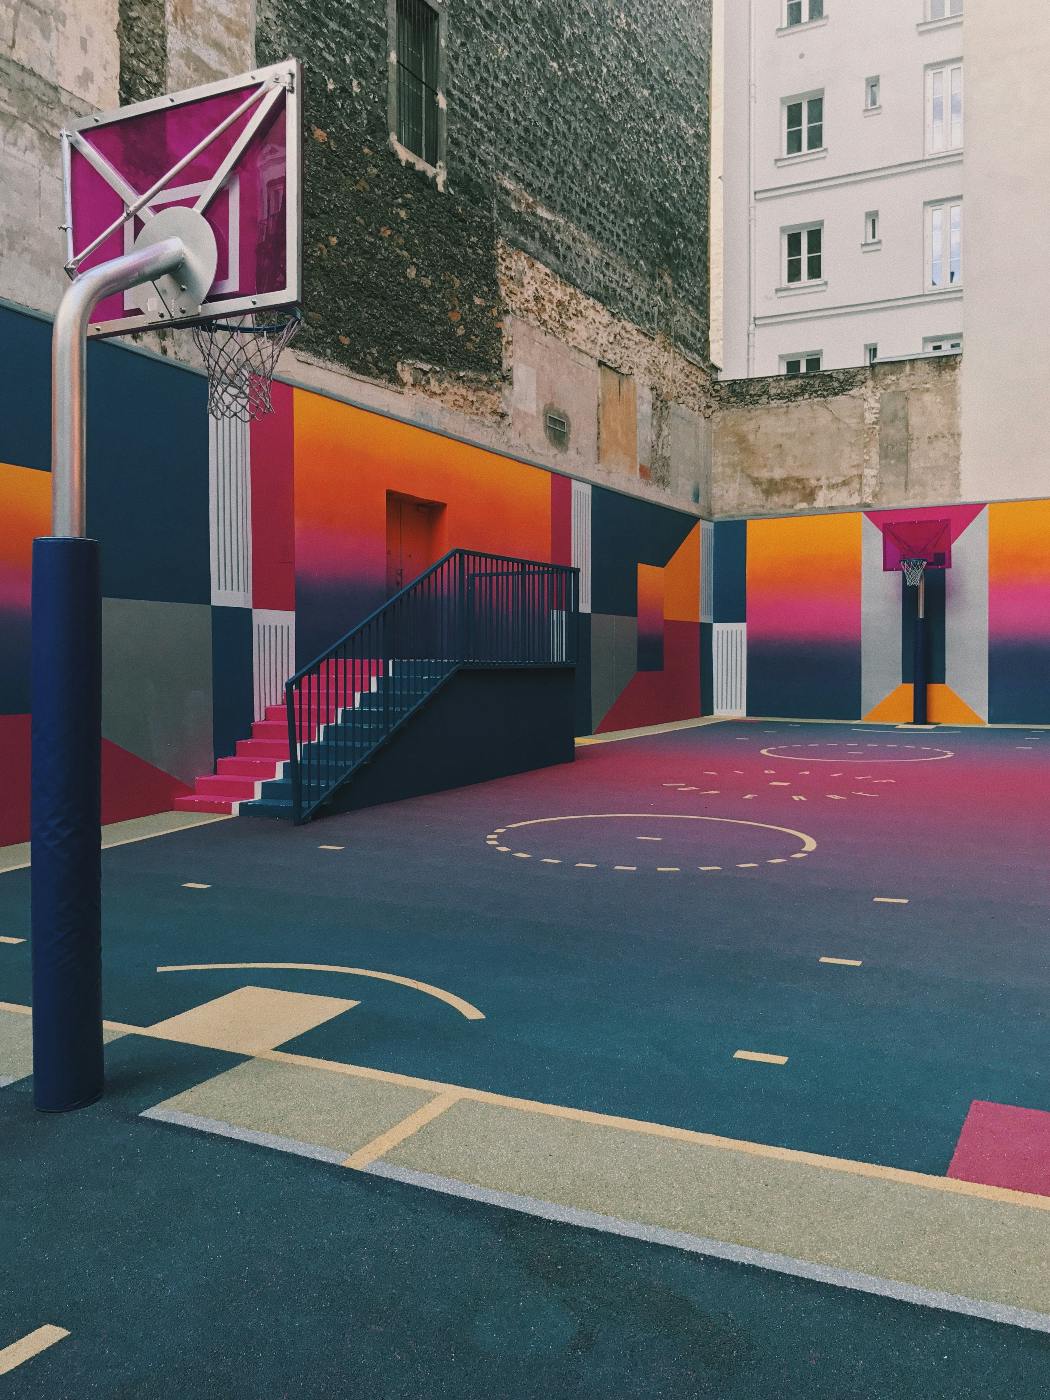 a City basketball court in multi colors